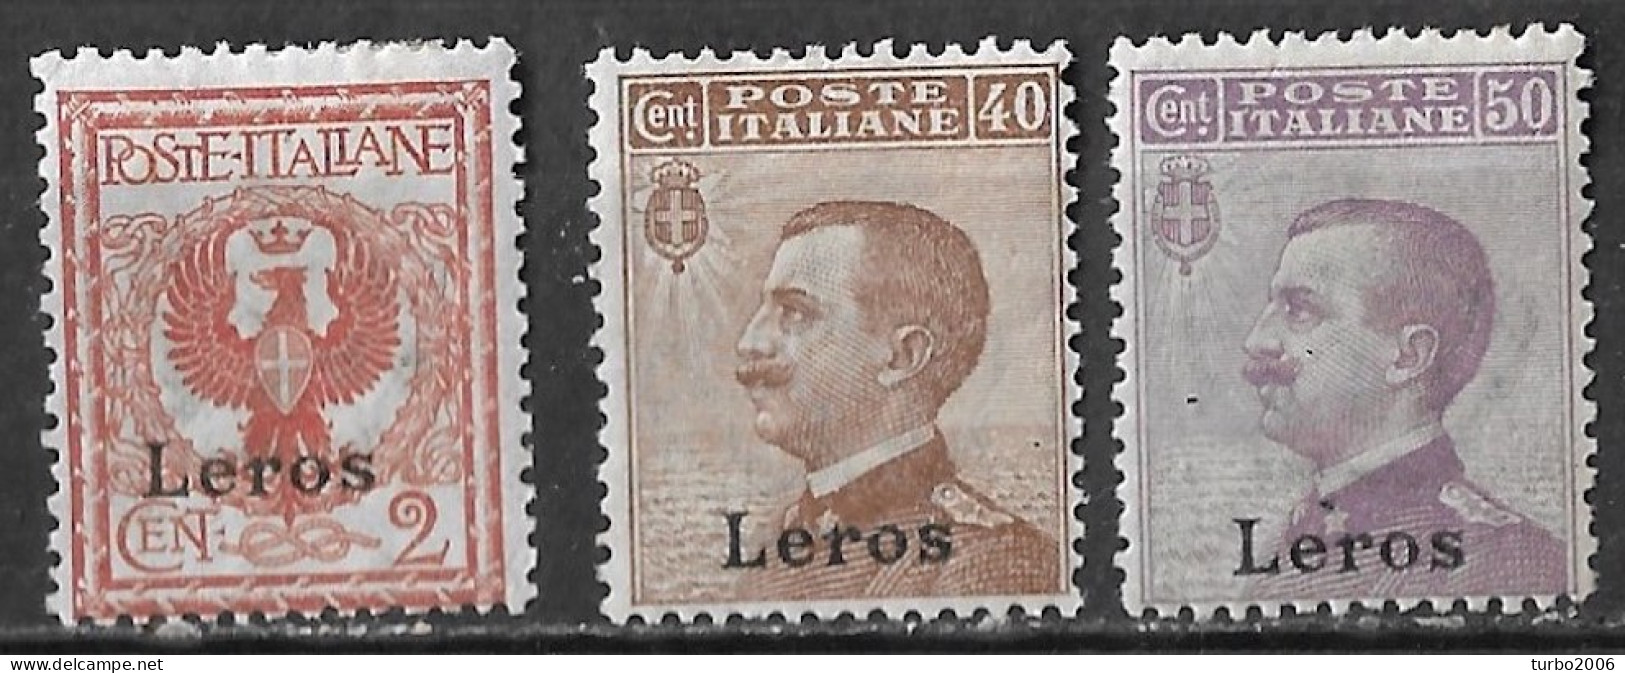 DODECANESE 1912 Italian Stamps With Black Overprint LEROS 3 Values From The Set Vl. 1-6-7 MH - Dodekanesos